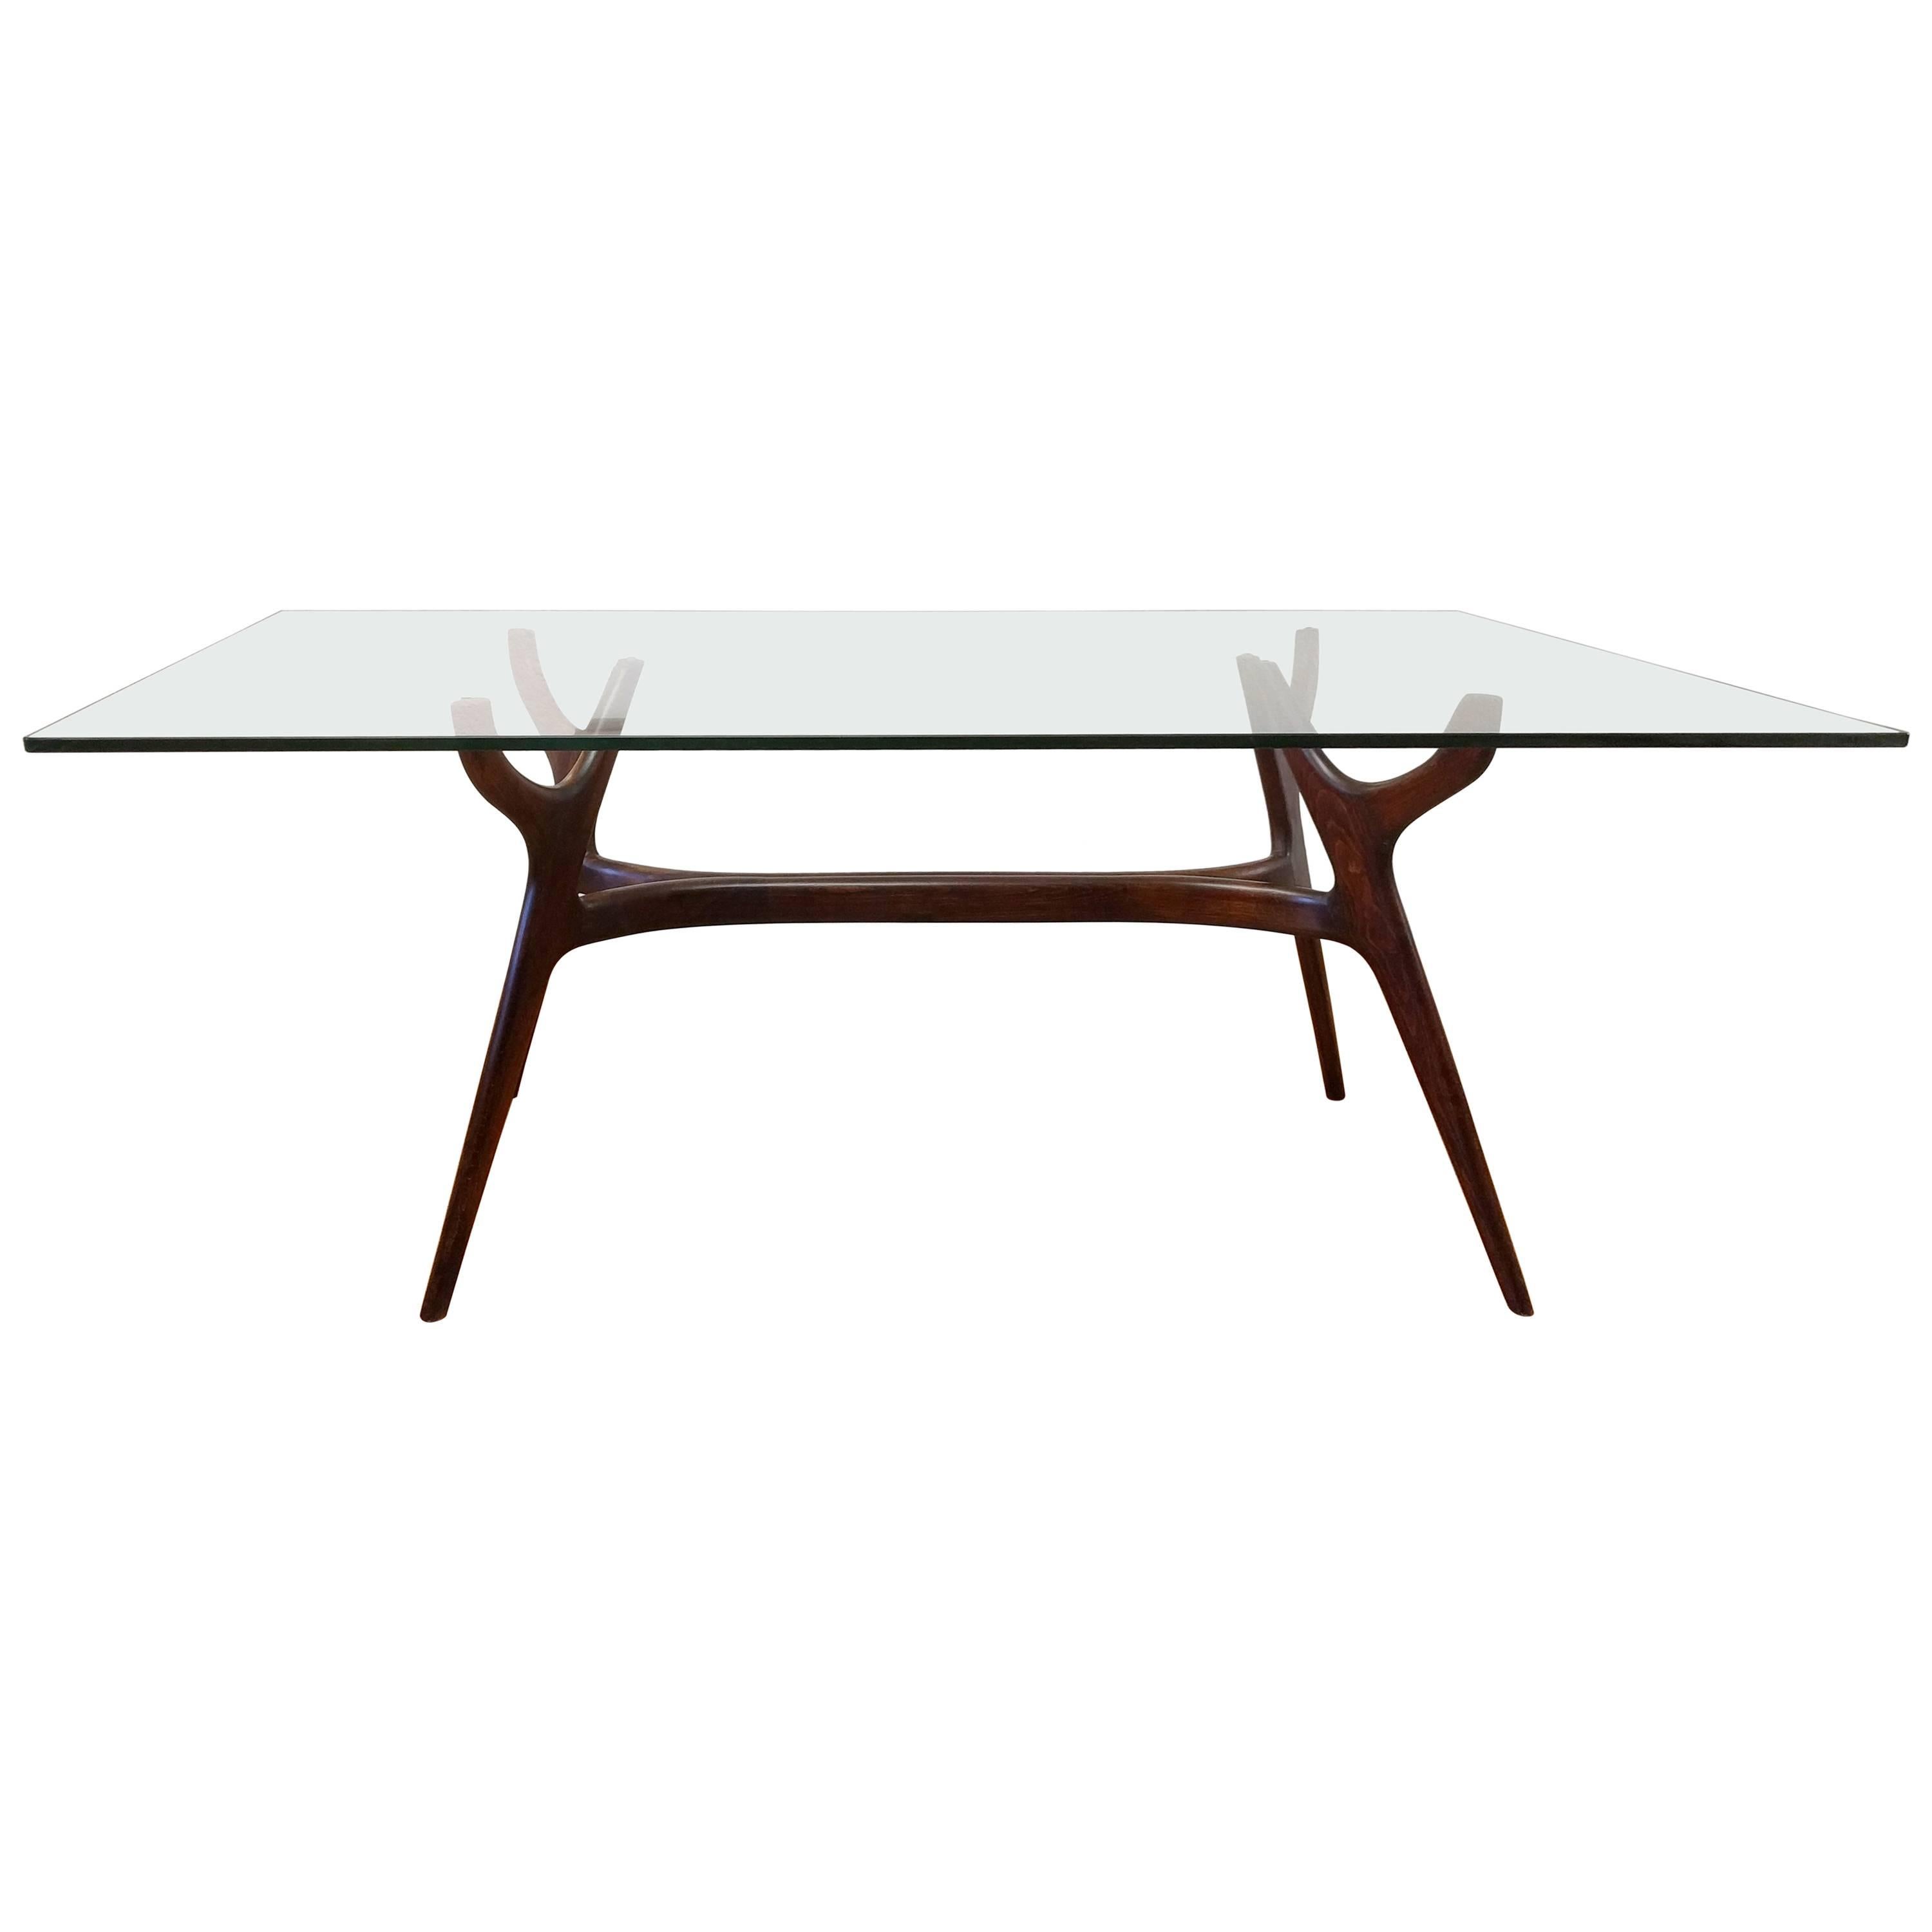 Beautiful Table Designed by Ico Parisi Made by Palisander, 1960 For Sale